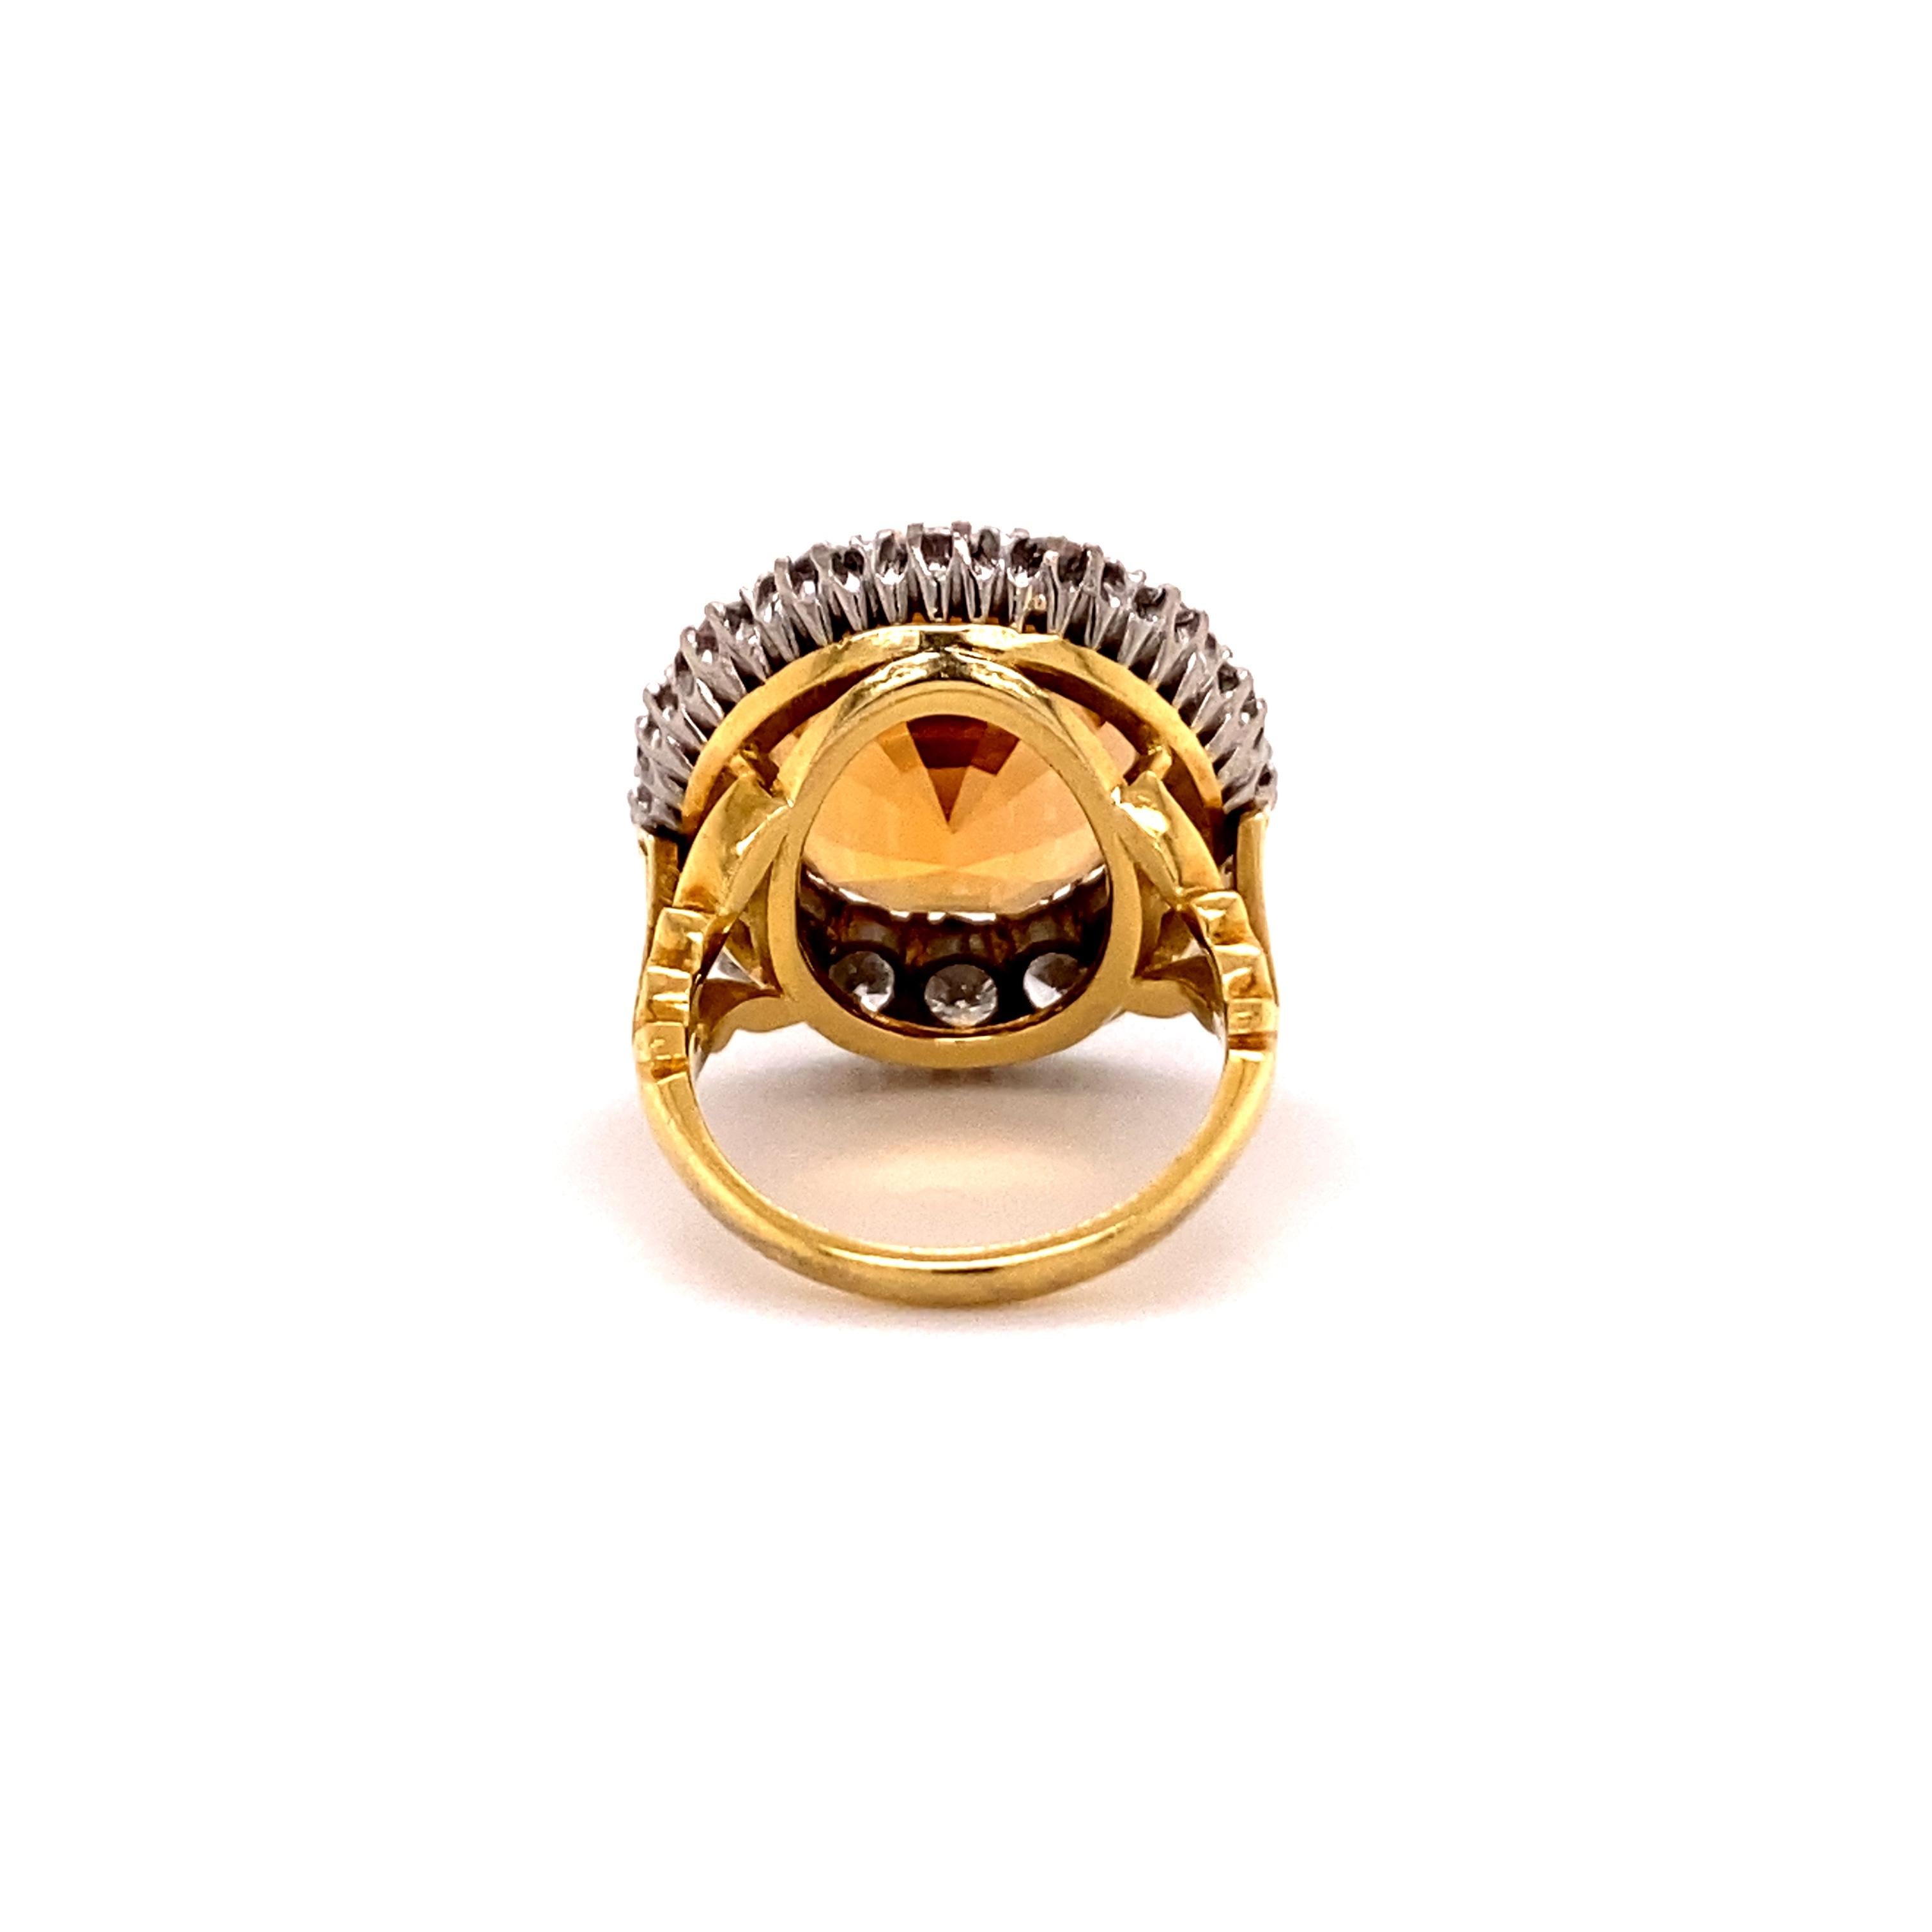 Cushion Cut Imperial Topaz and Diamond Ring in 18 Karat Yellow and White Gold